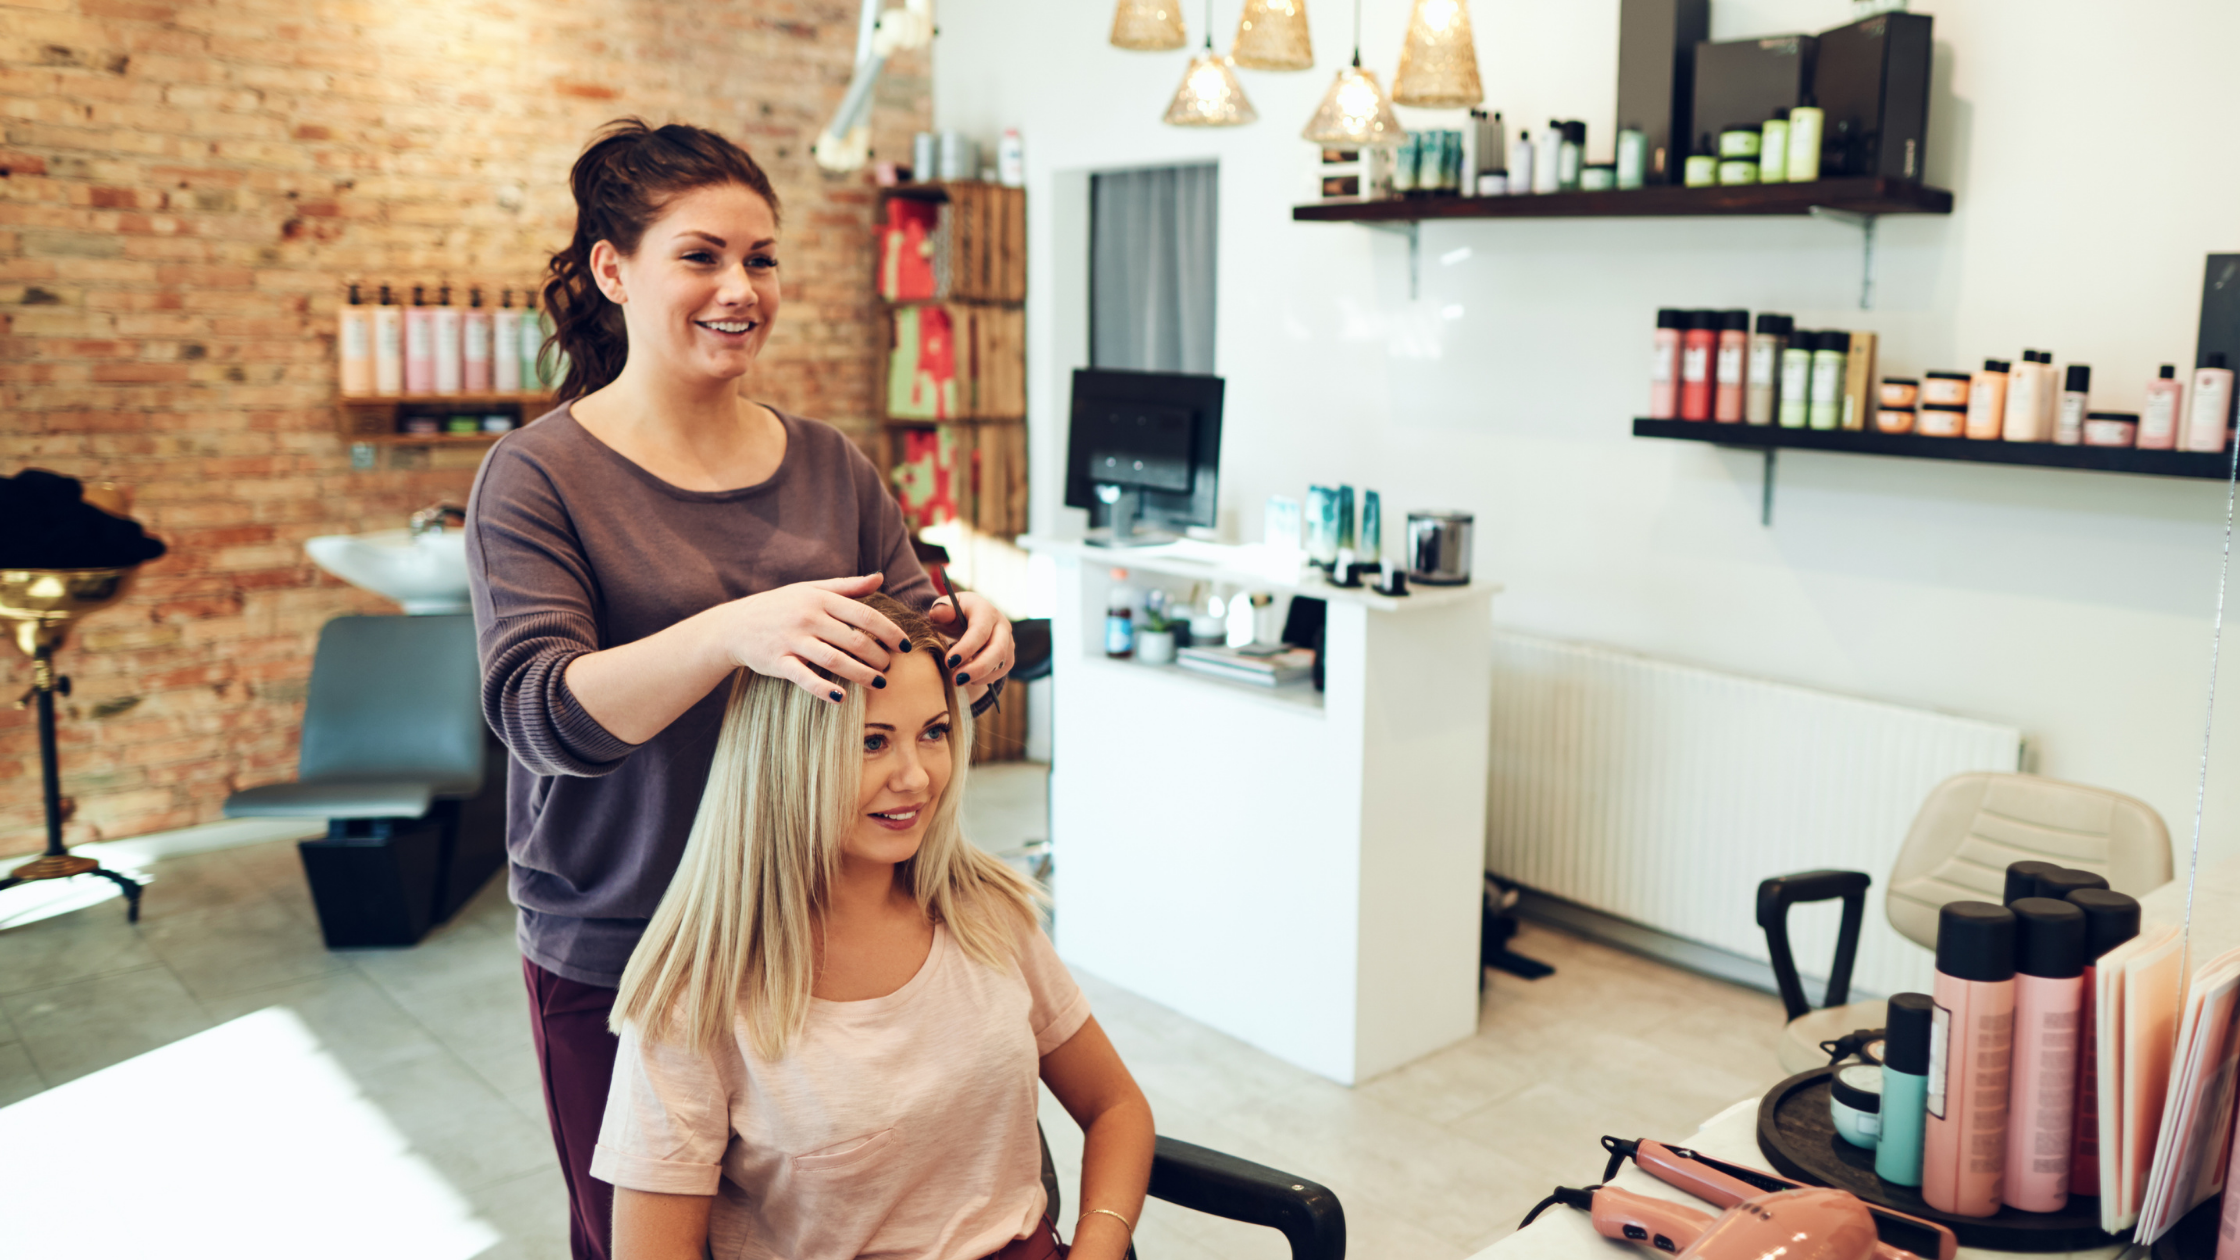 How to give your hair extension client a perfect consultation